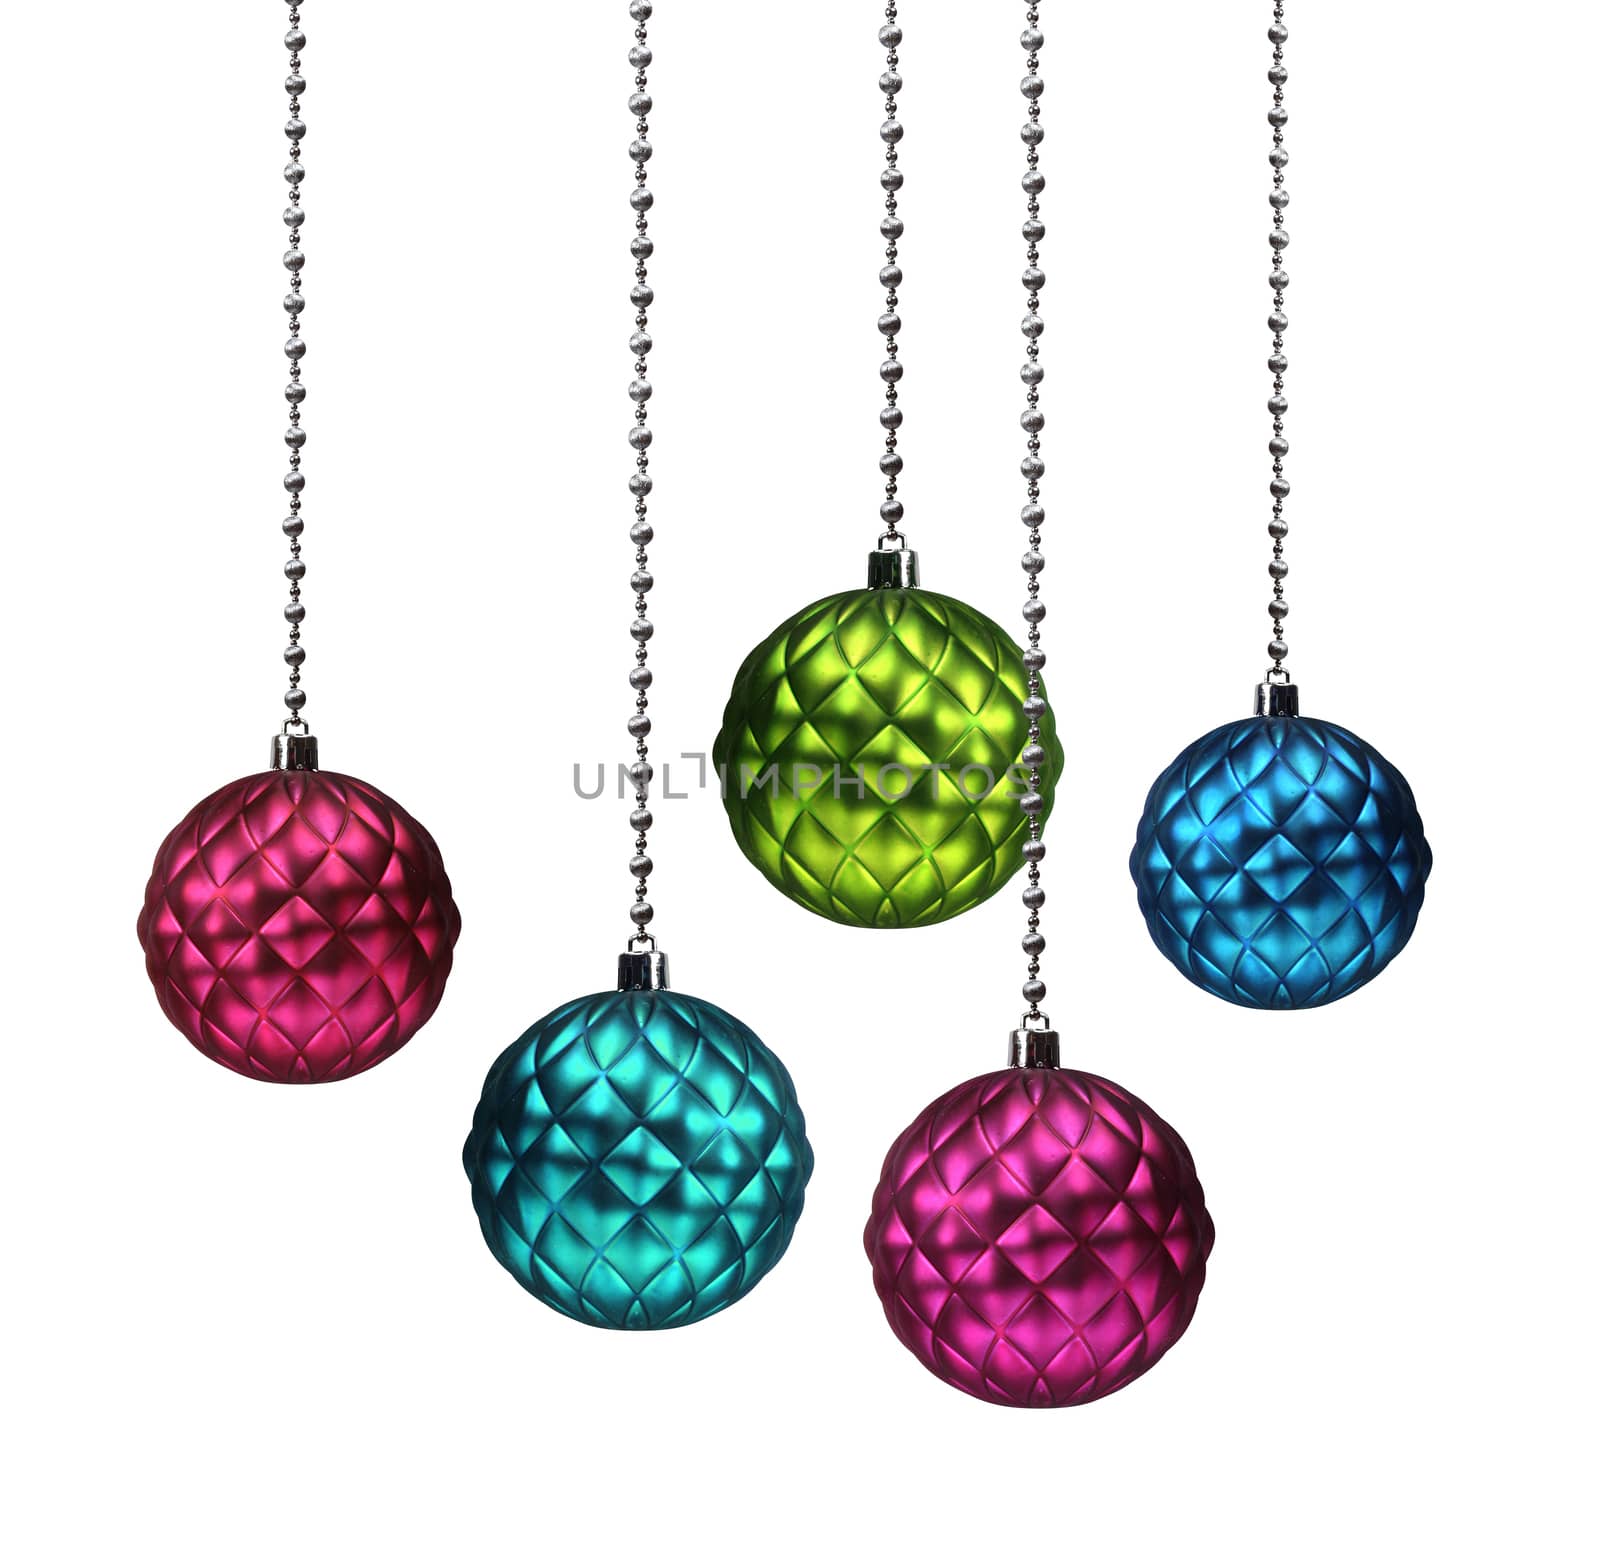 Colorful Christmas balls by anterovium